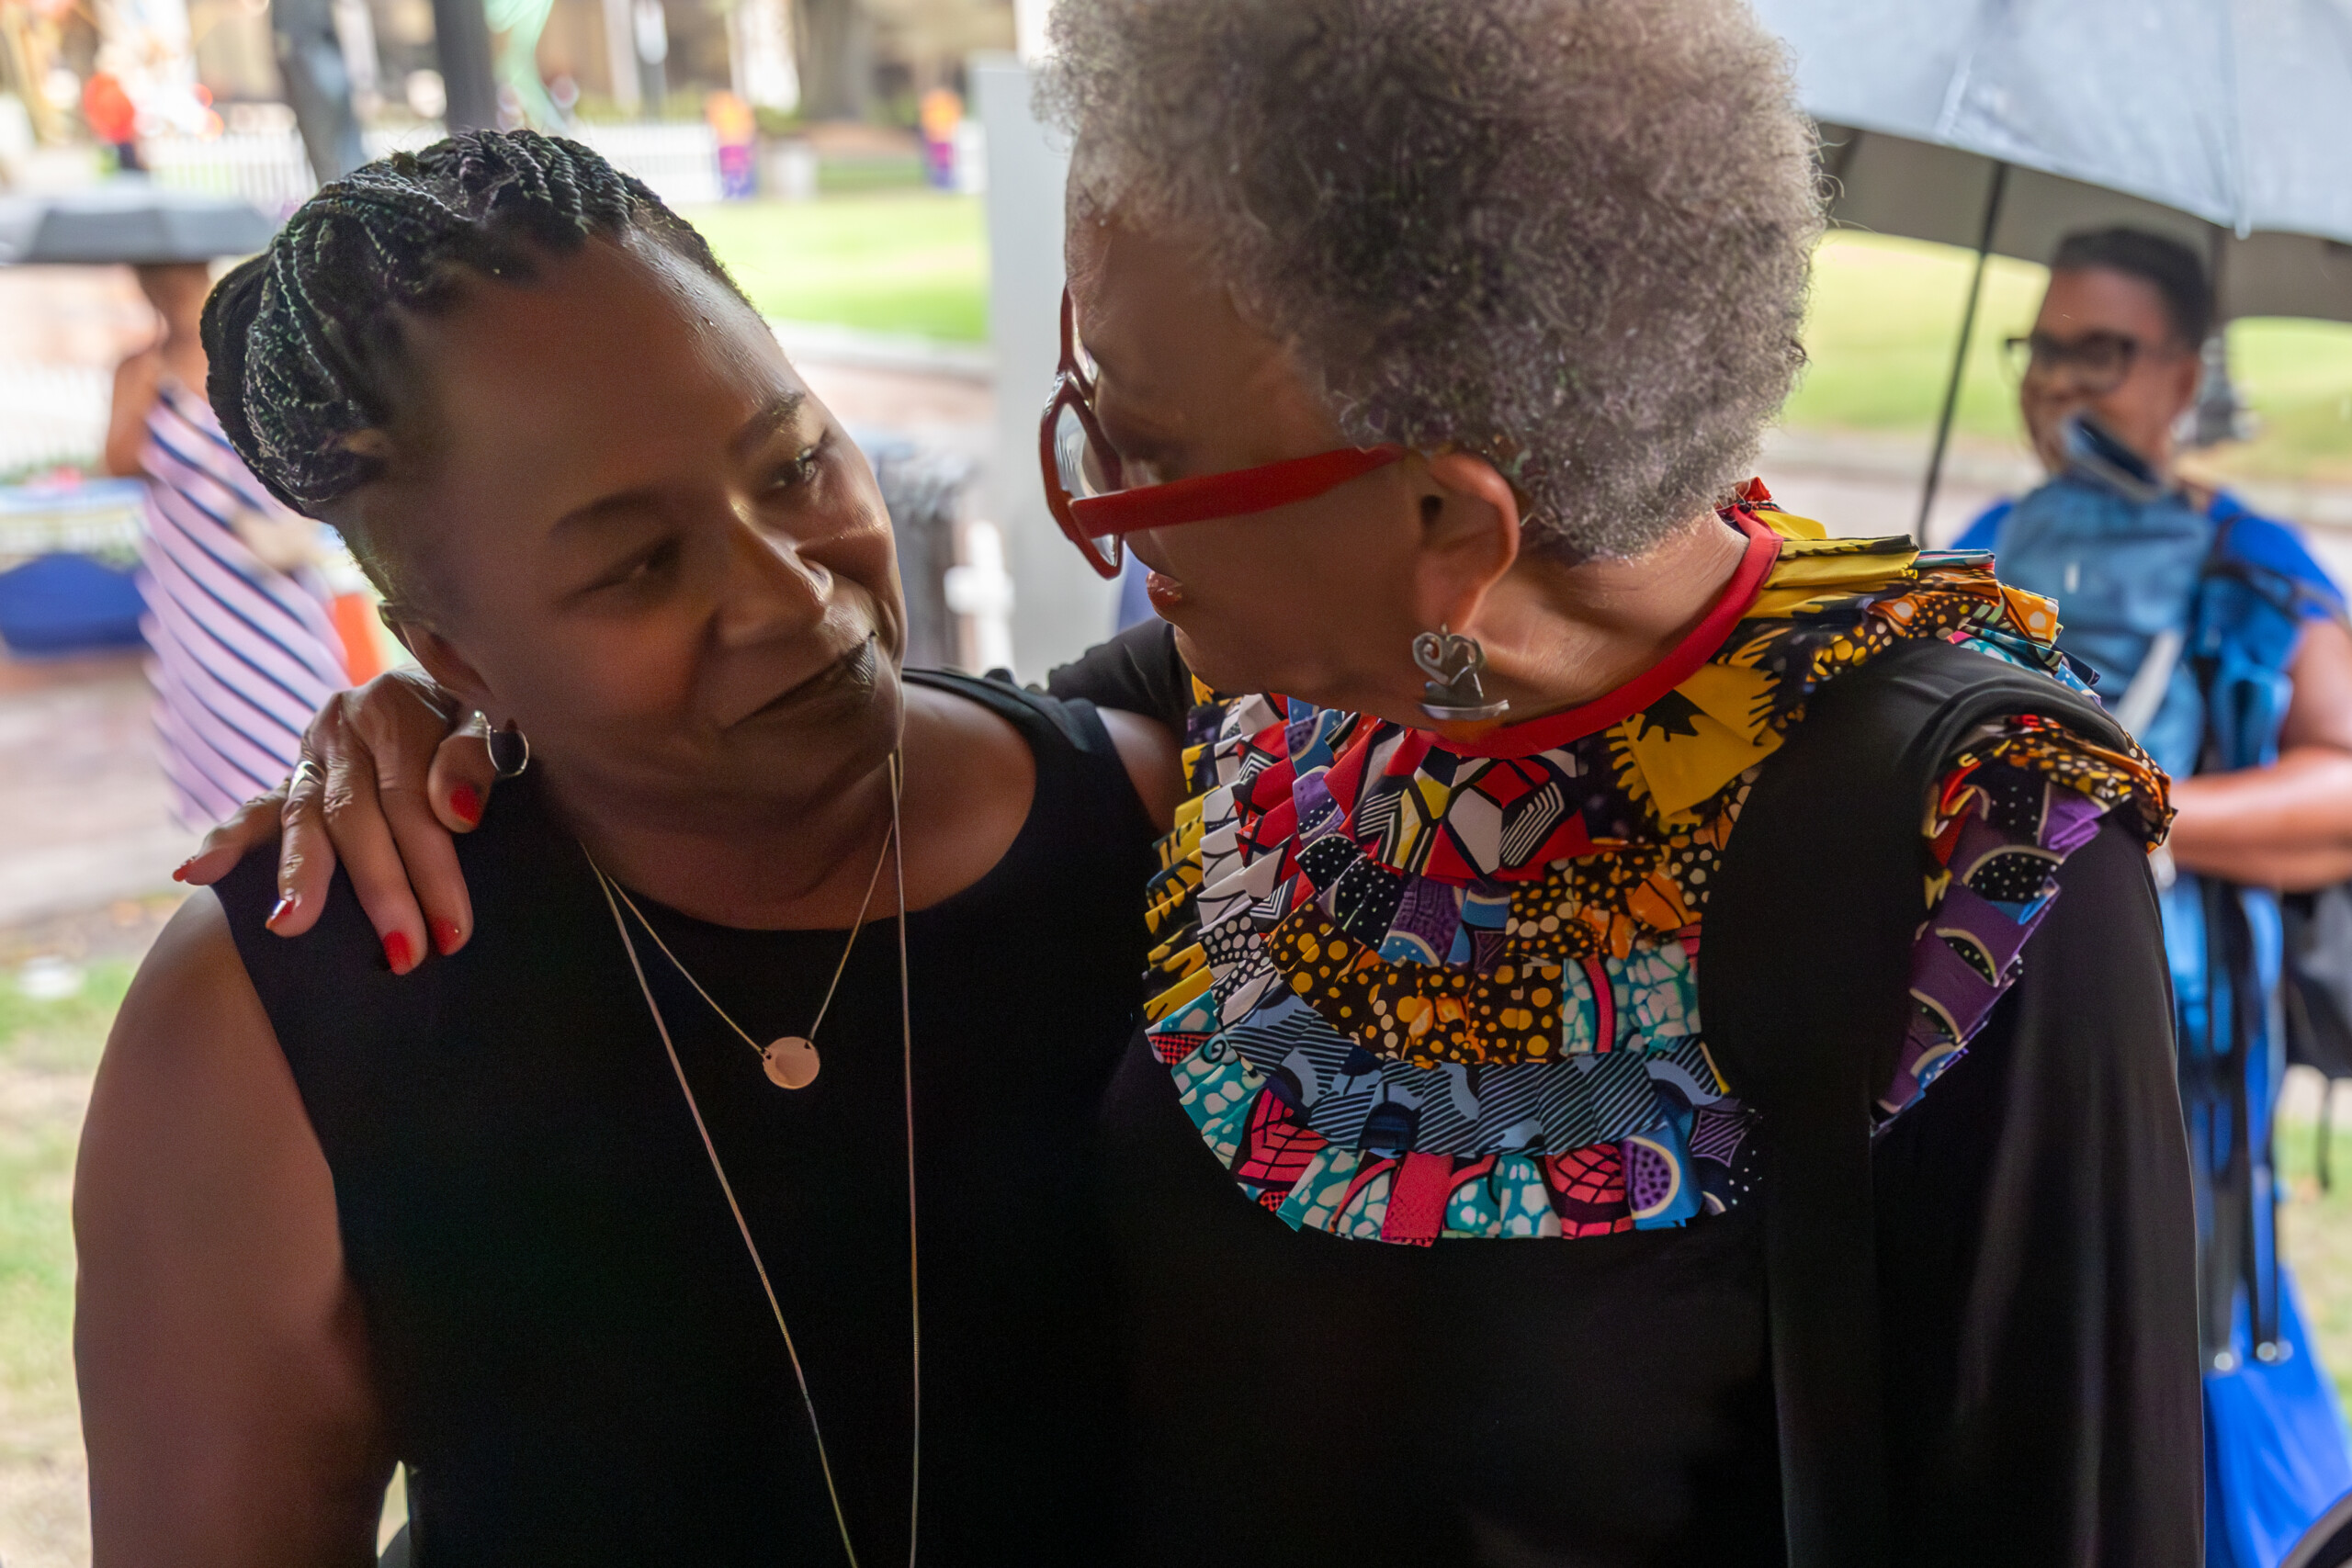 Diana Greene, left, speaks with Johnnetta Betsch Cole after a reading of banned and restricted books in James Weldon Johnson Park in Jacksonville. Cole, an anthropologist and former president of Spelman College and Bennett College, is a Jacksonville native. Greene, CEO of the Children's Literacy Initiative, is the former superintendent of Duval County Public Schools.